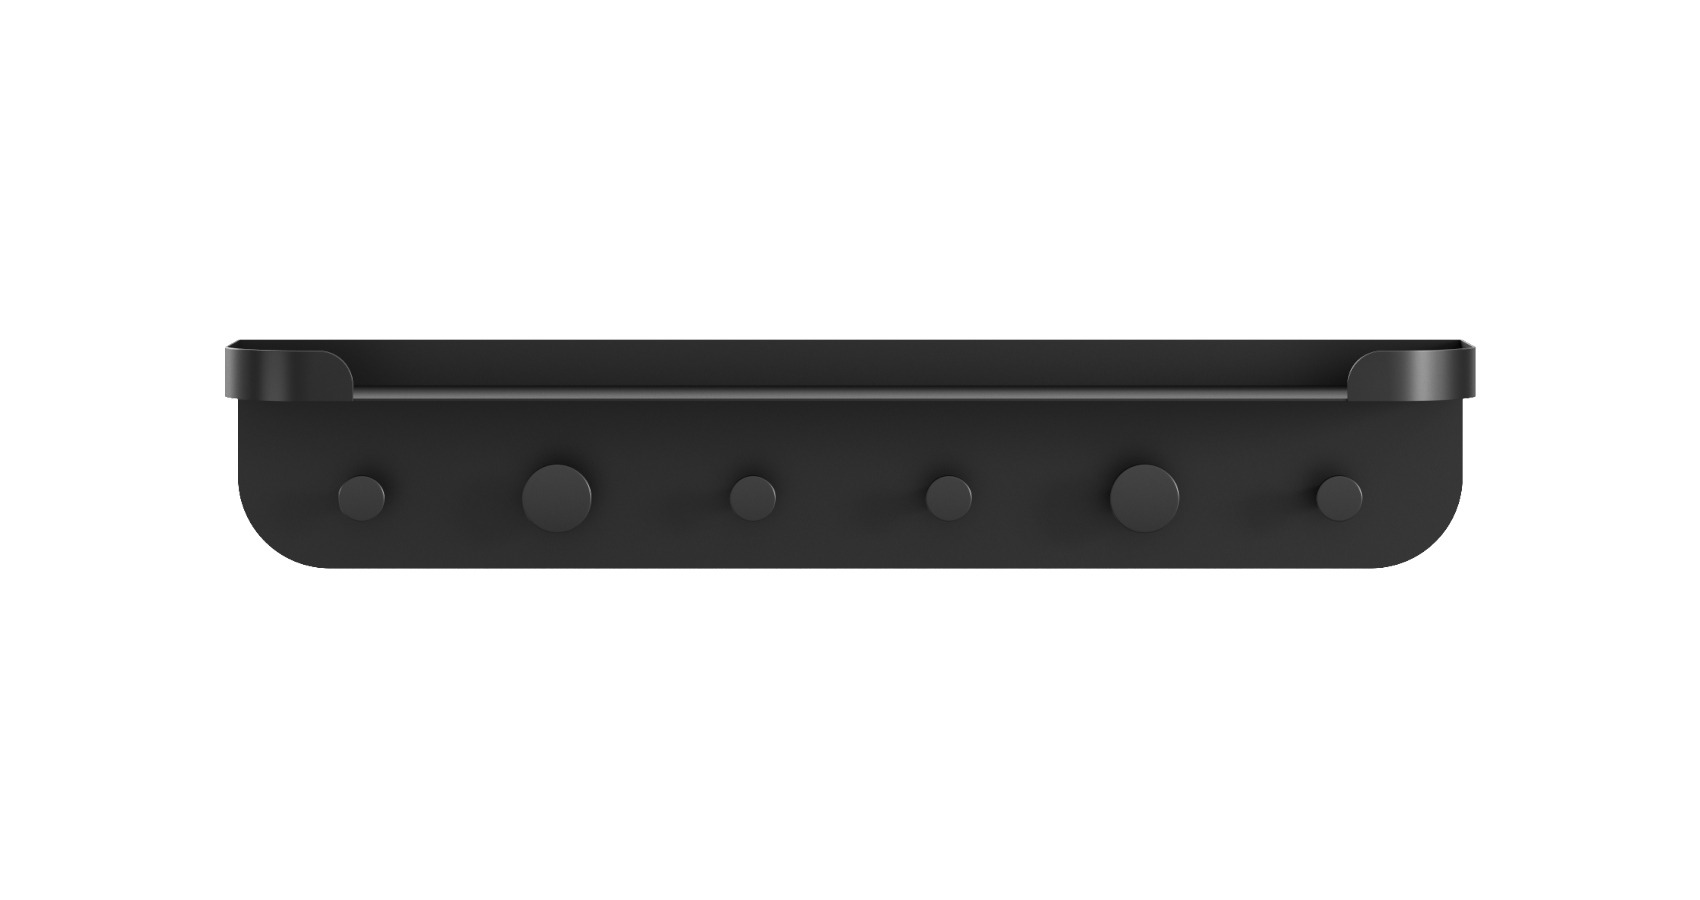 Buddi Coat Hook and Shelf in black in Direct front view